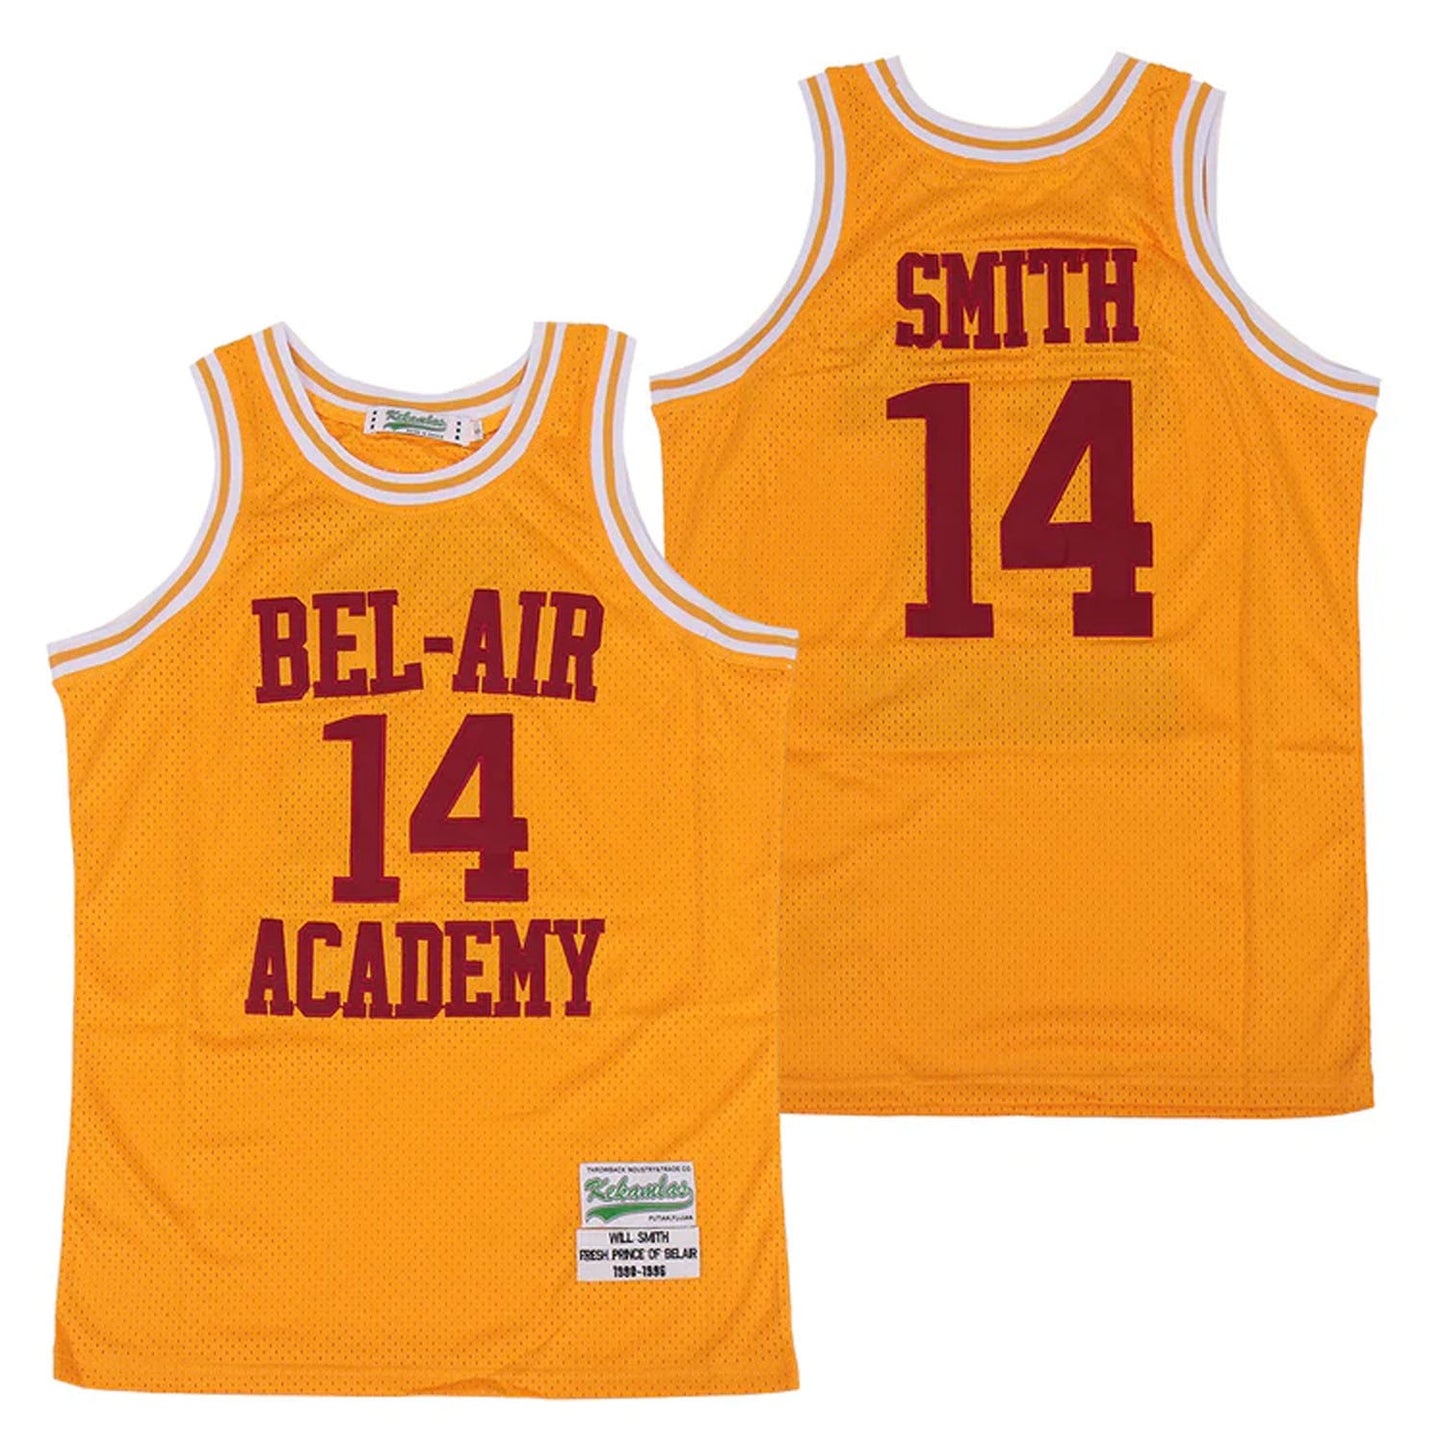 Will Smith #14 Bel-Air Academy Jersey